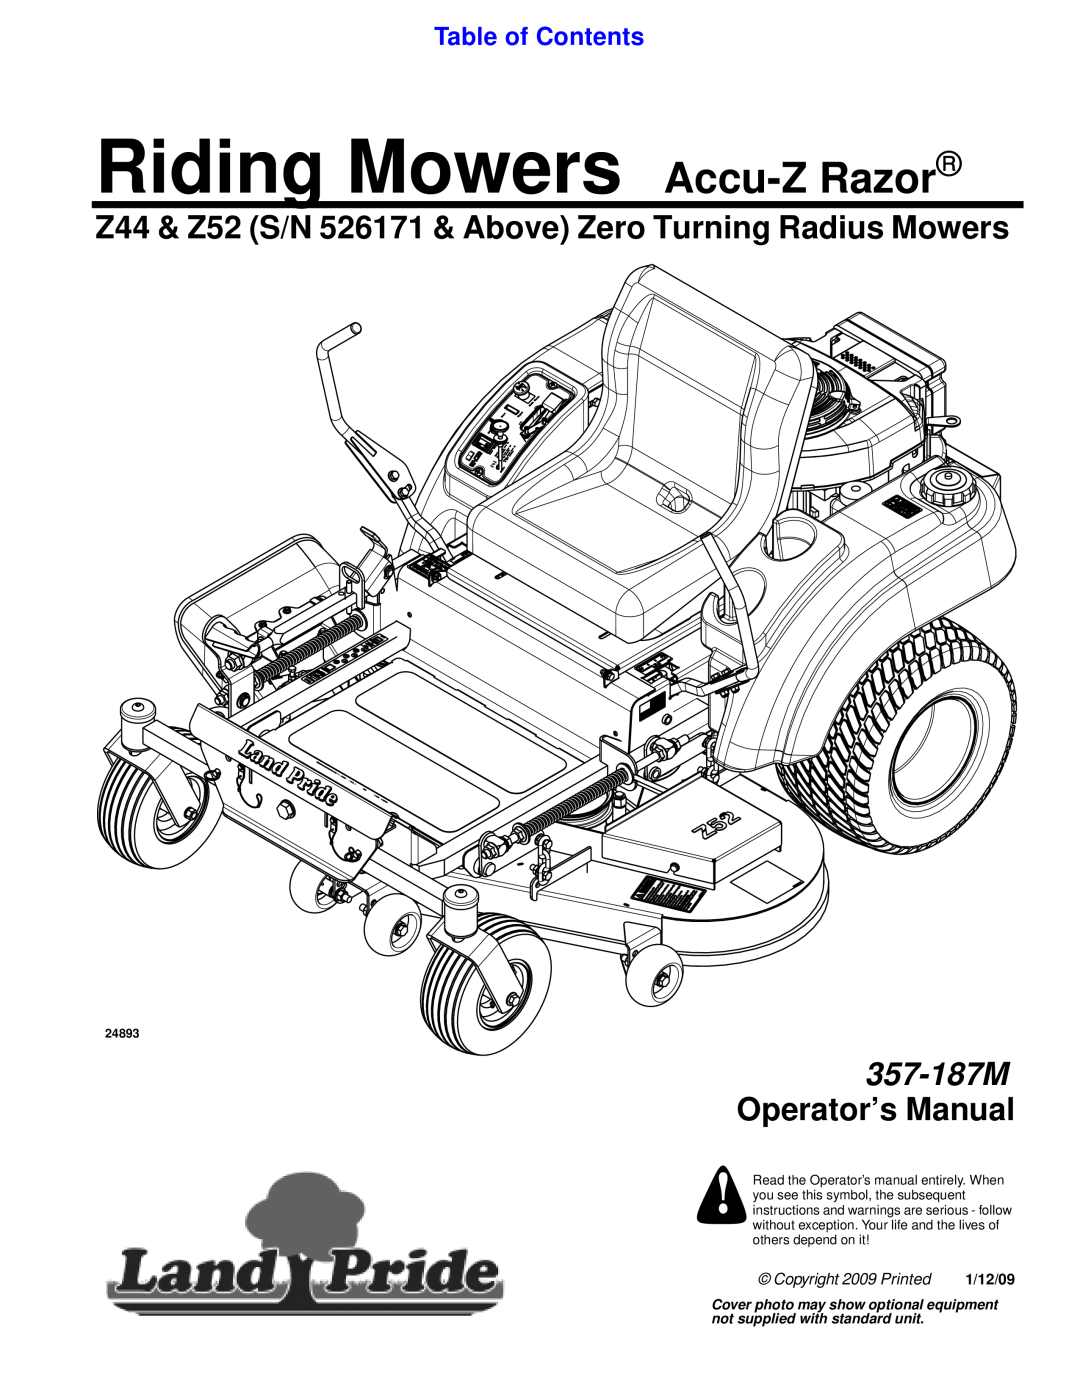 Land Pride 357-187M manual Z44 & Z52 S/N 526171 & Above Zero Turning Radius Mowers, Table of Contents, others depend on it 